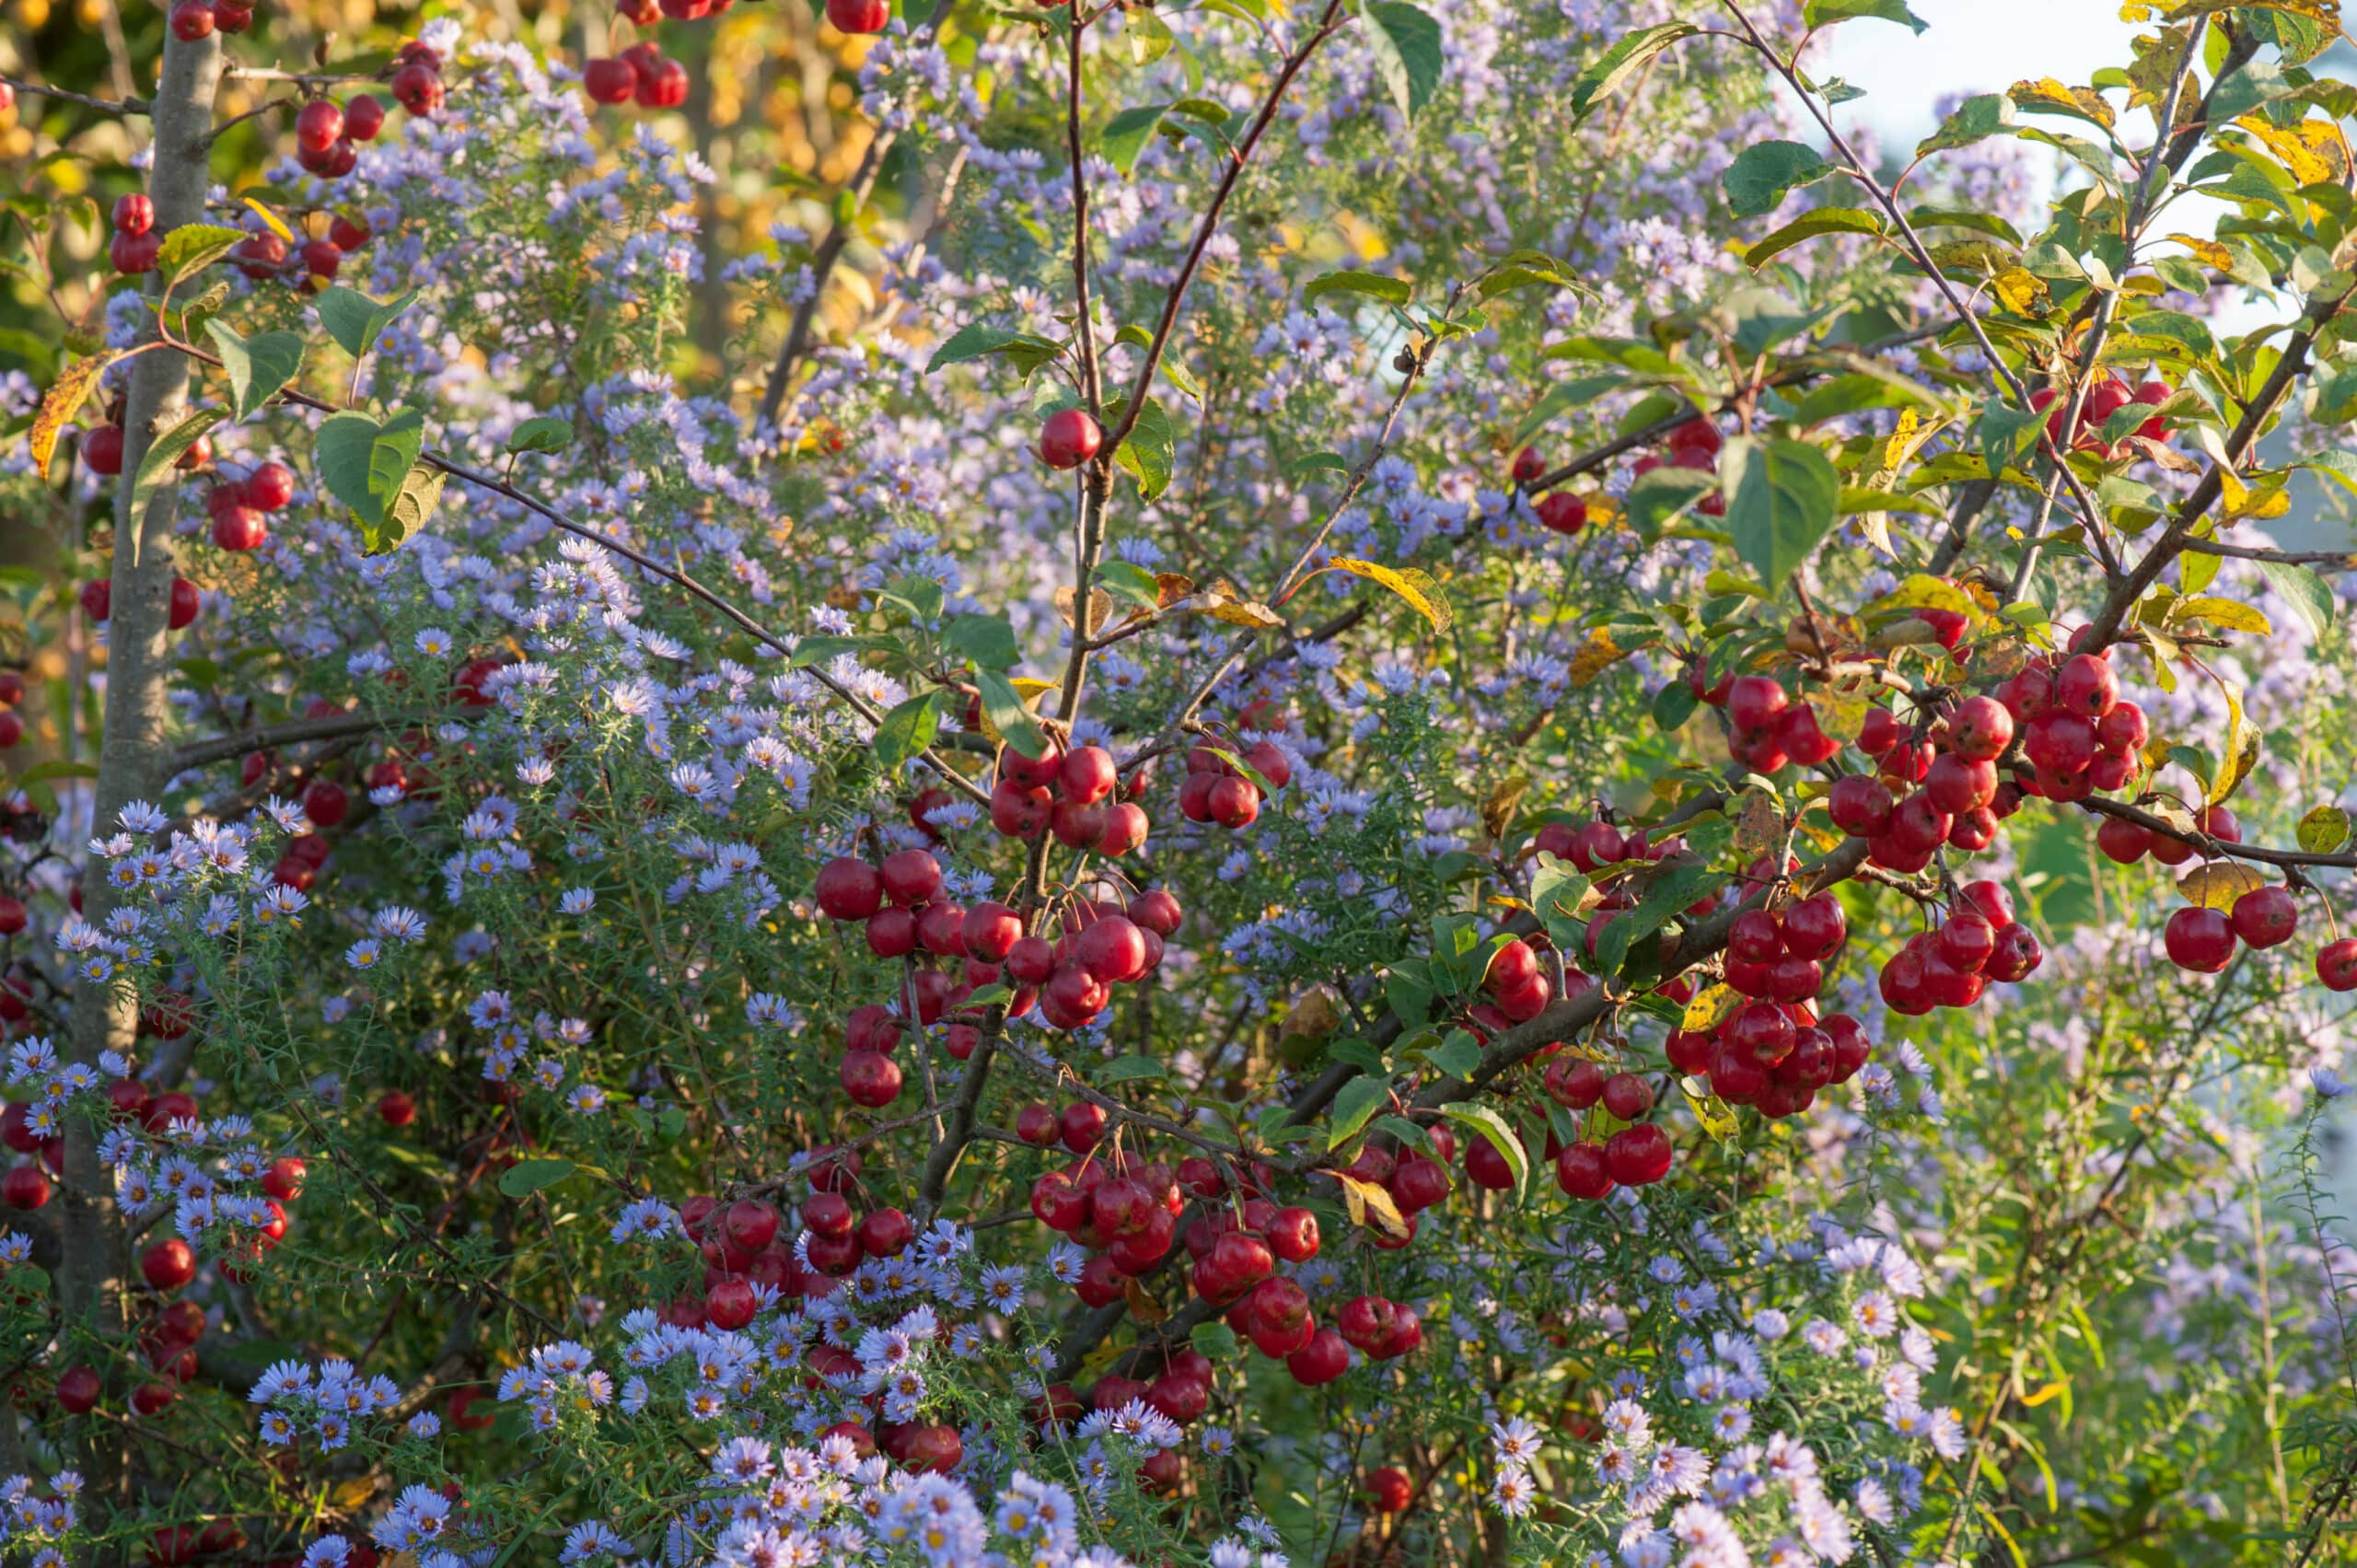 Aster novi-belgii and branches of Malus 'Evereste' - Ornamental apple with fruits